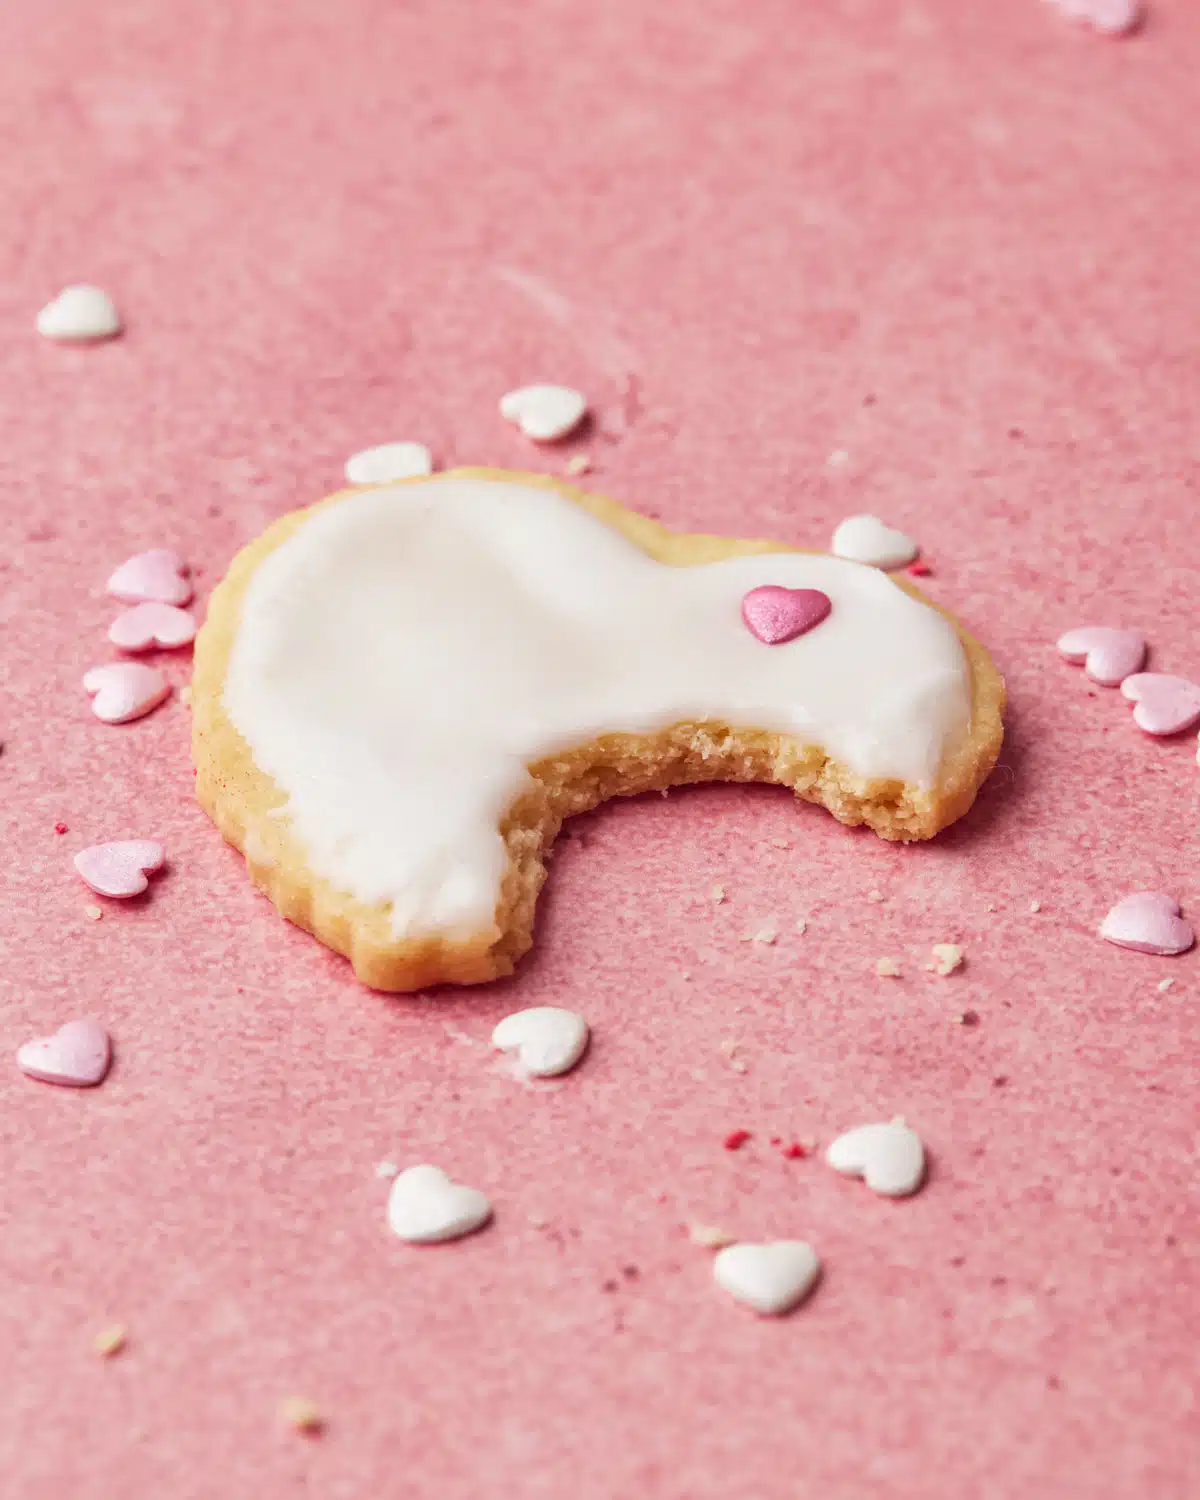 Heart shaped sugar cookie with a bite taken out of it.